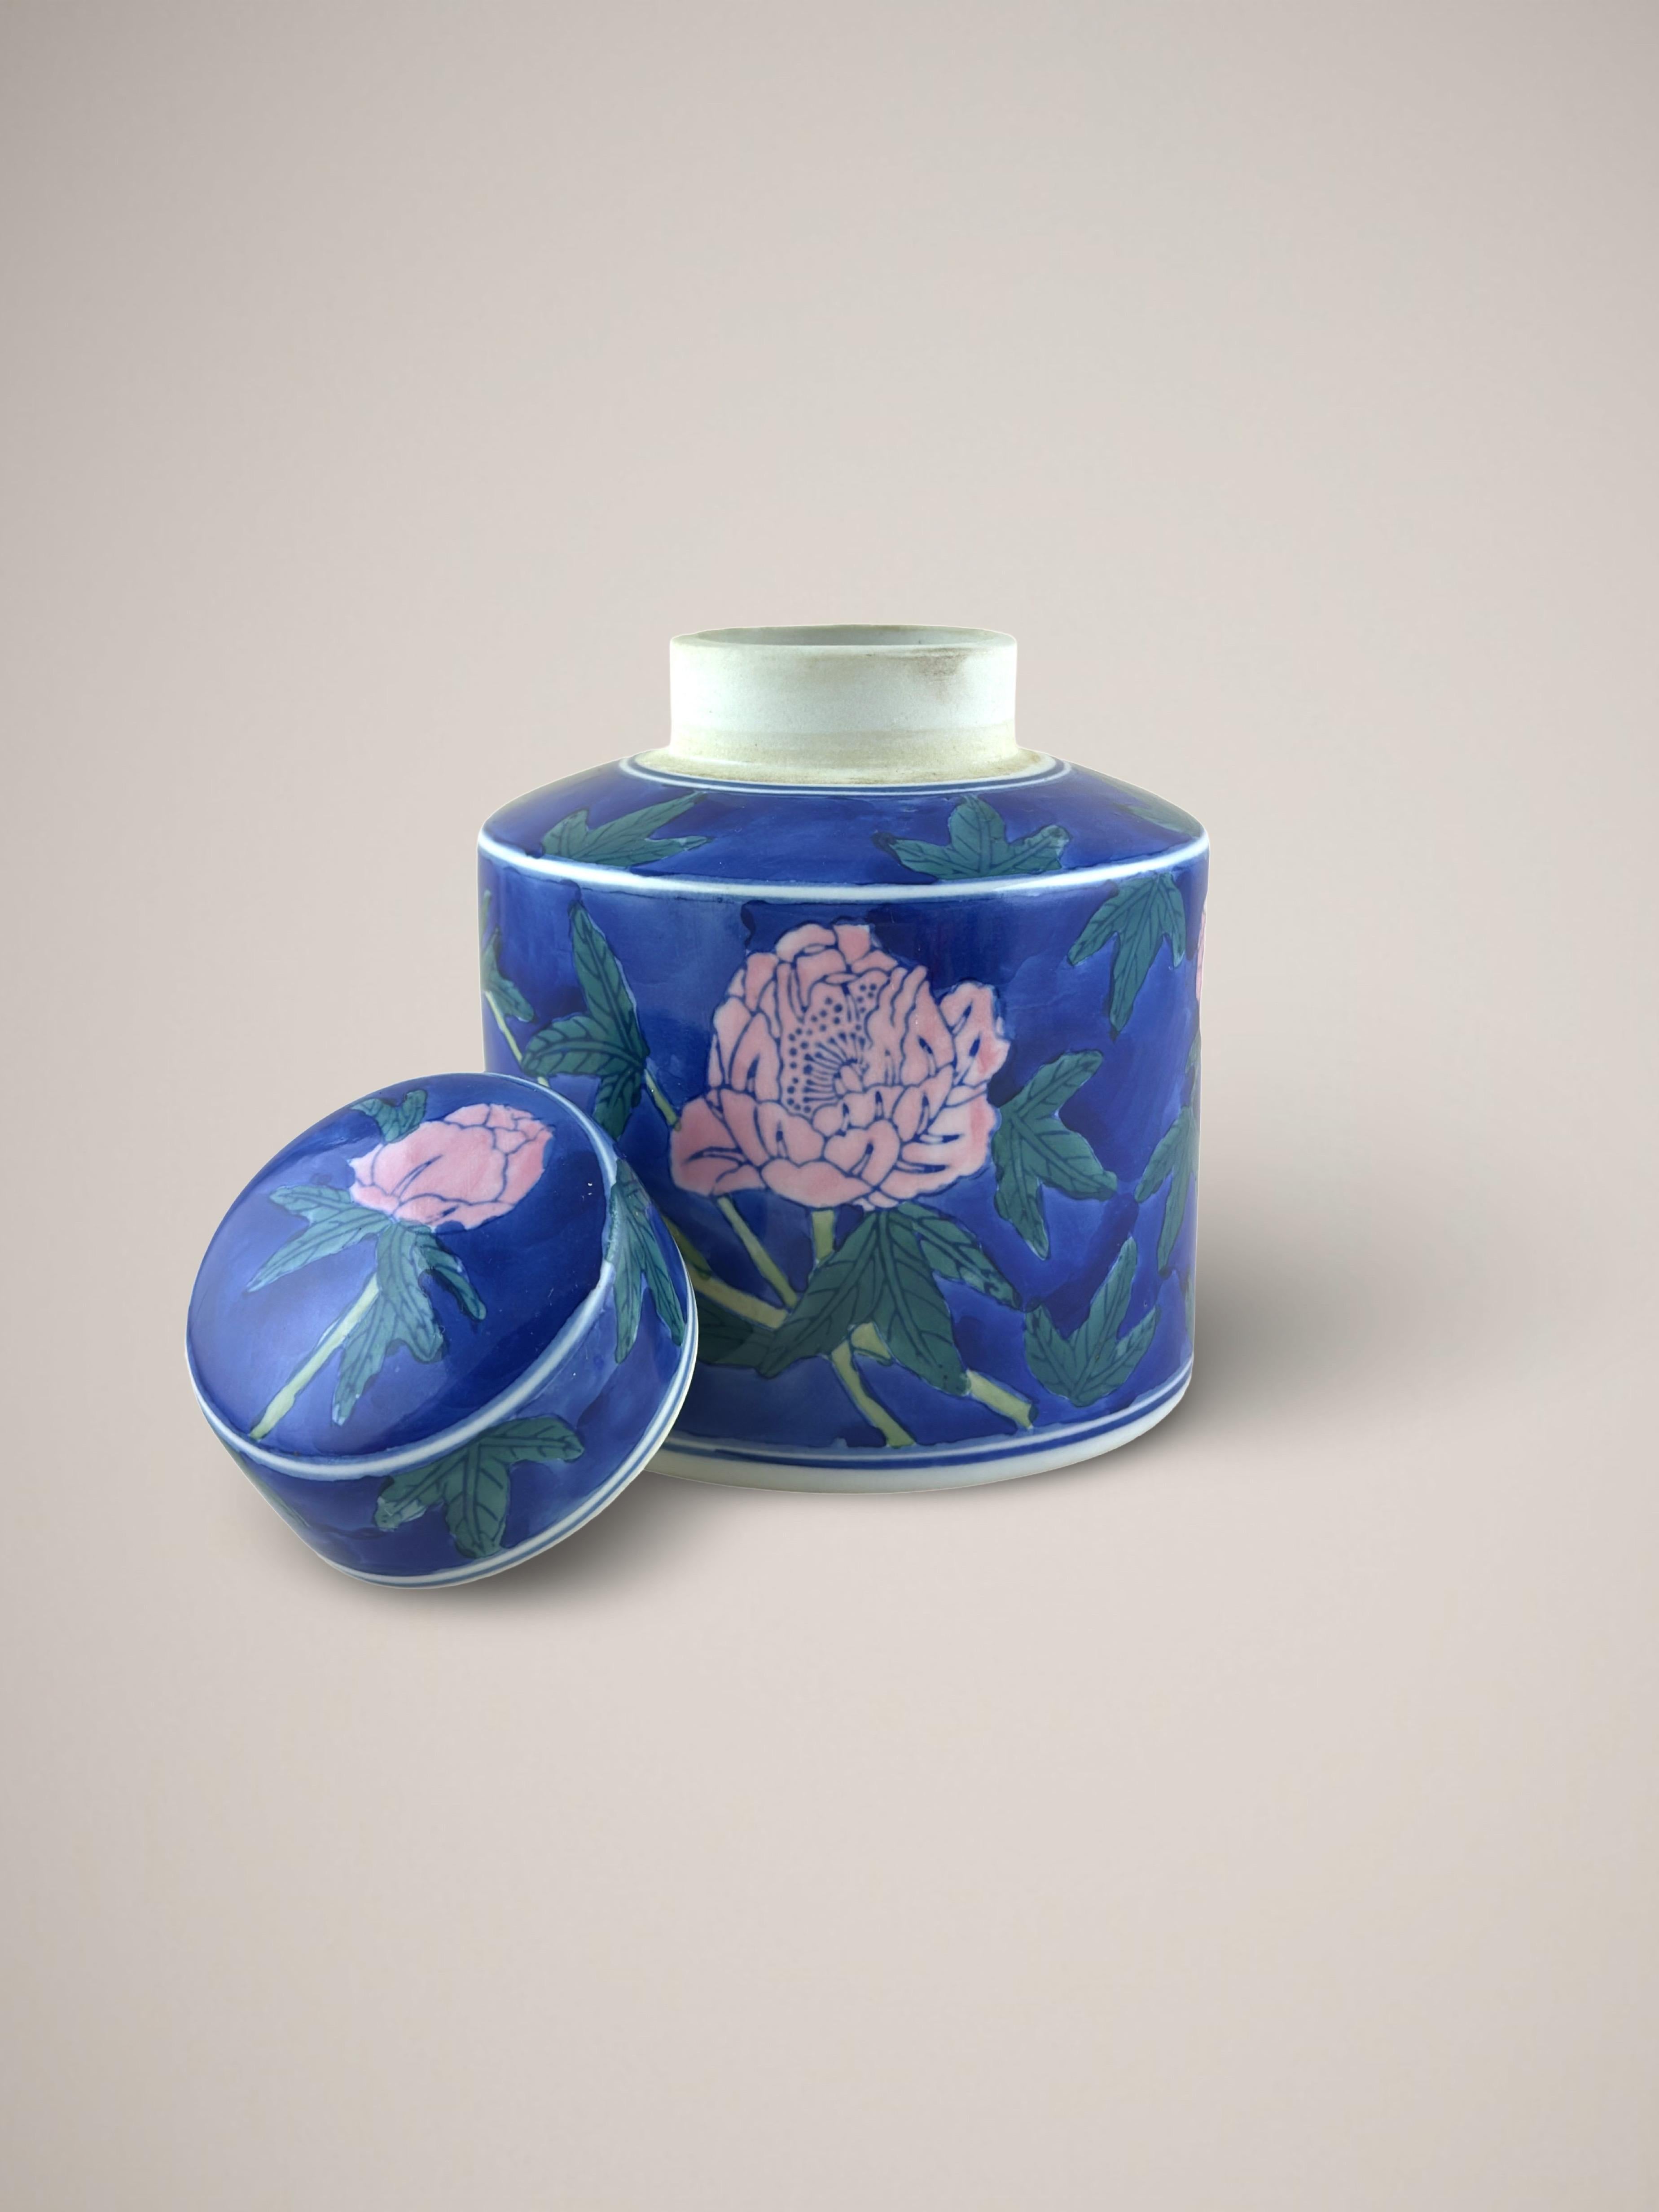 Qing Vintage Chinese 'Famille Rose' Ginger Jar in Blue and Pink 